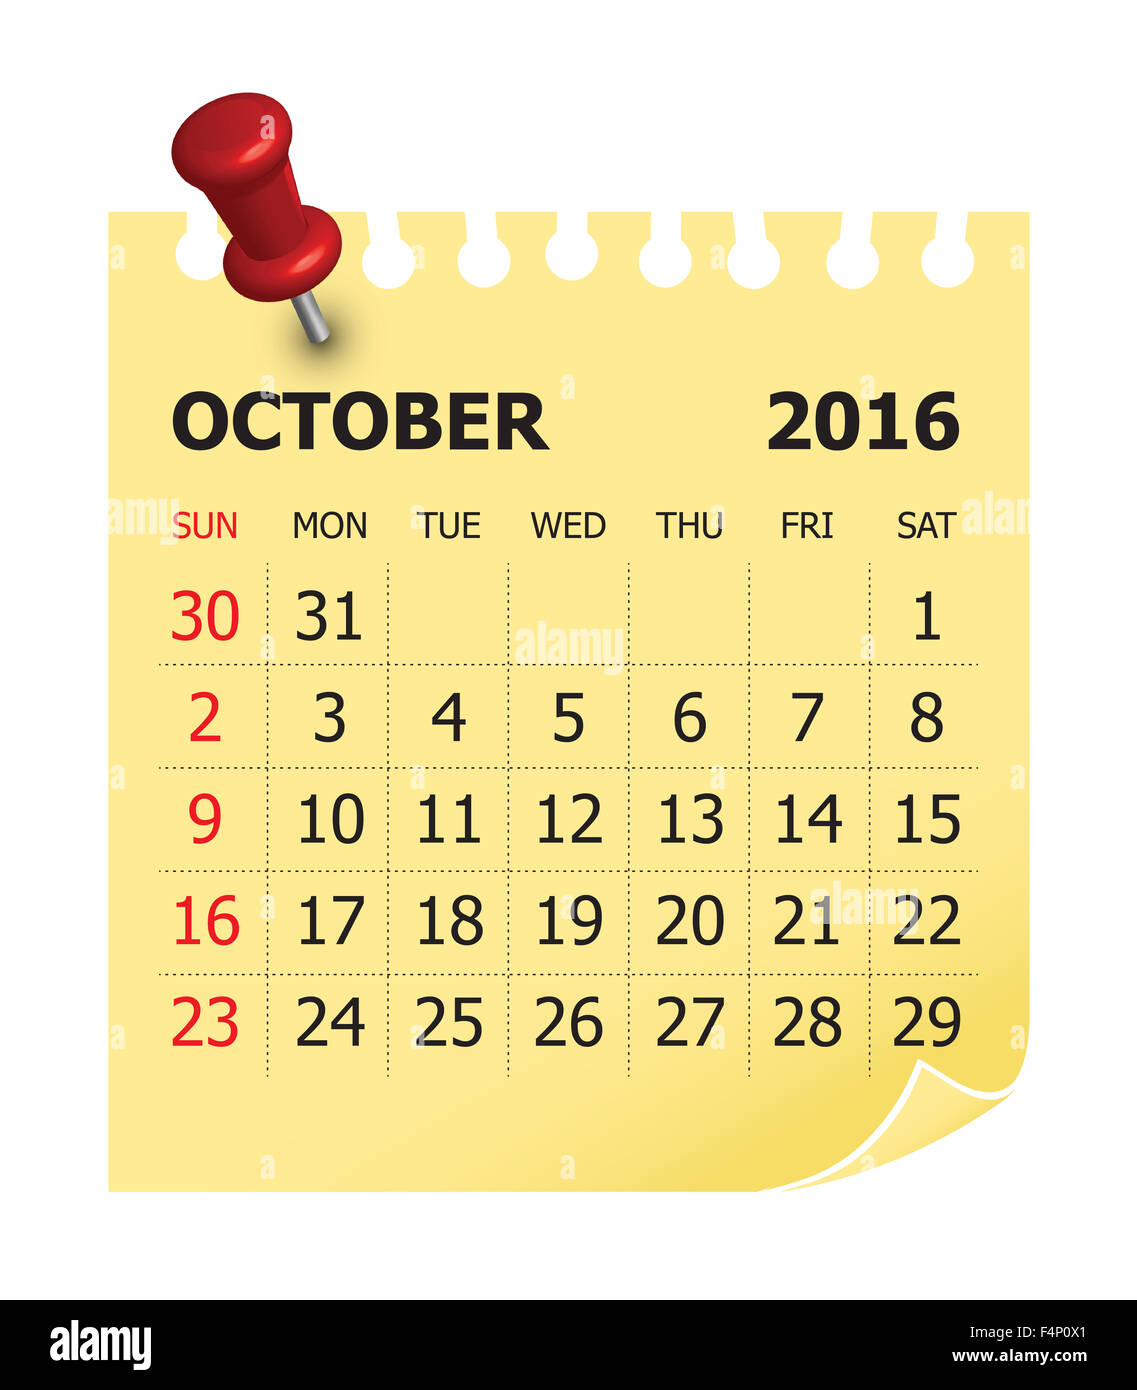 October calendar hires stock photography and images Alamy